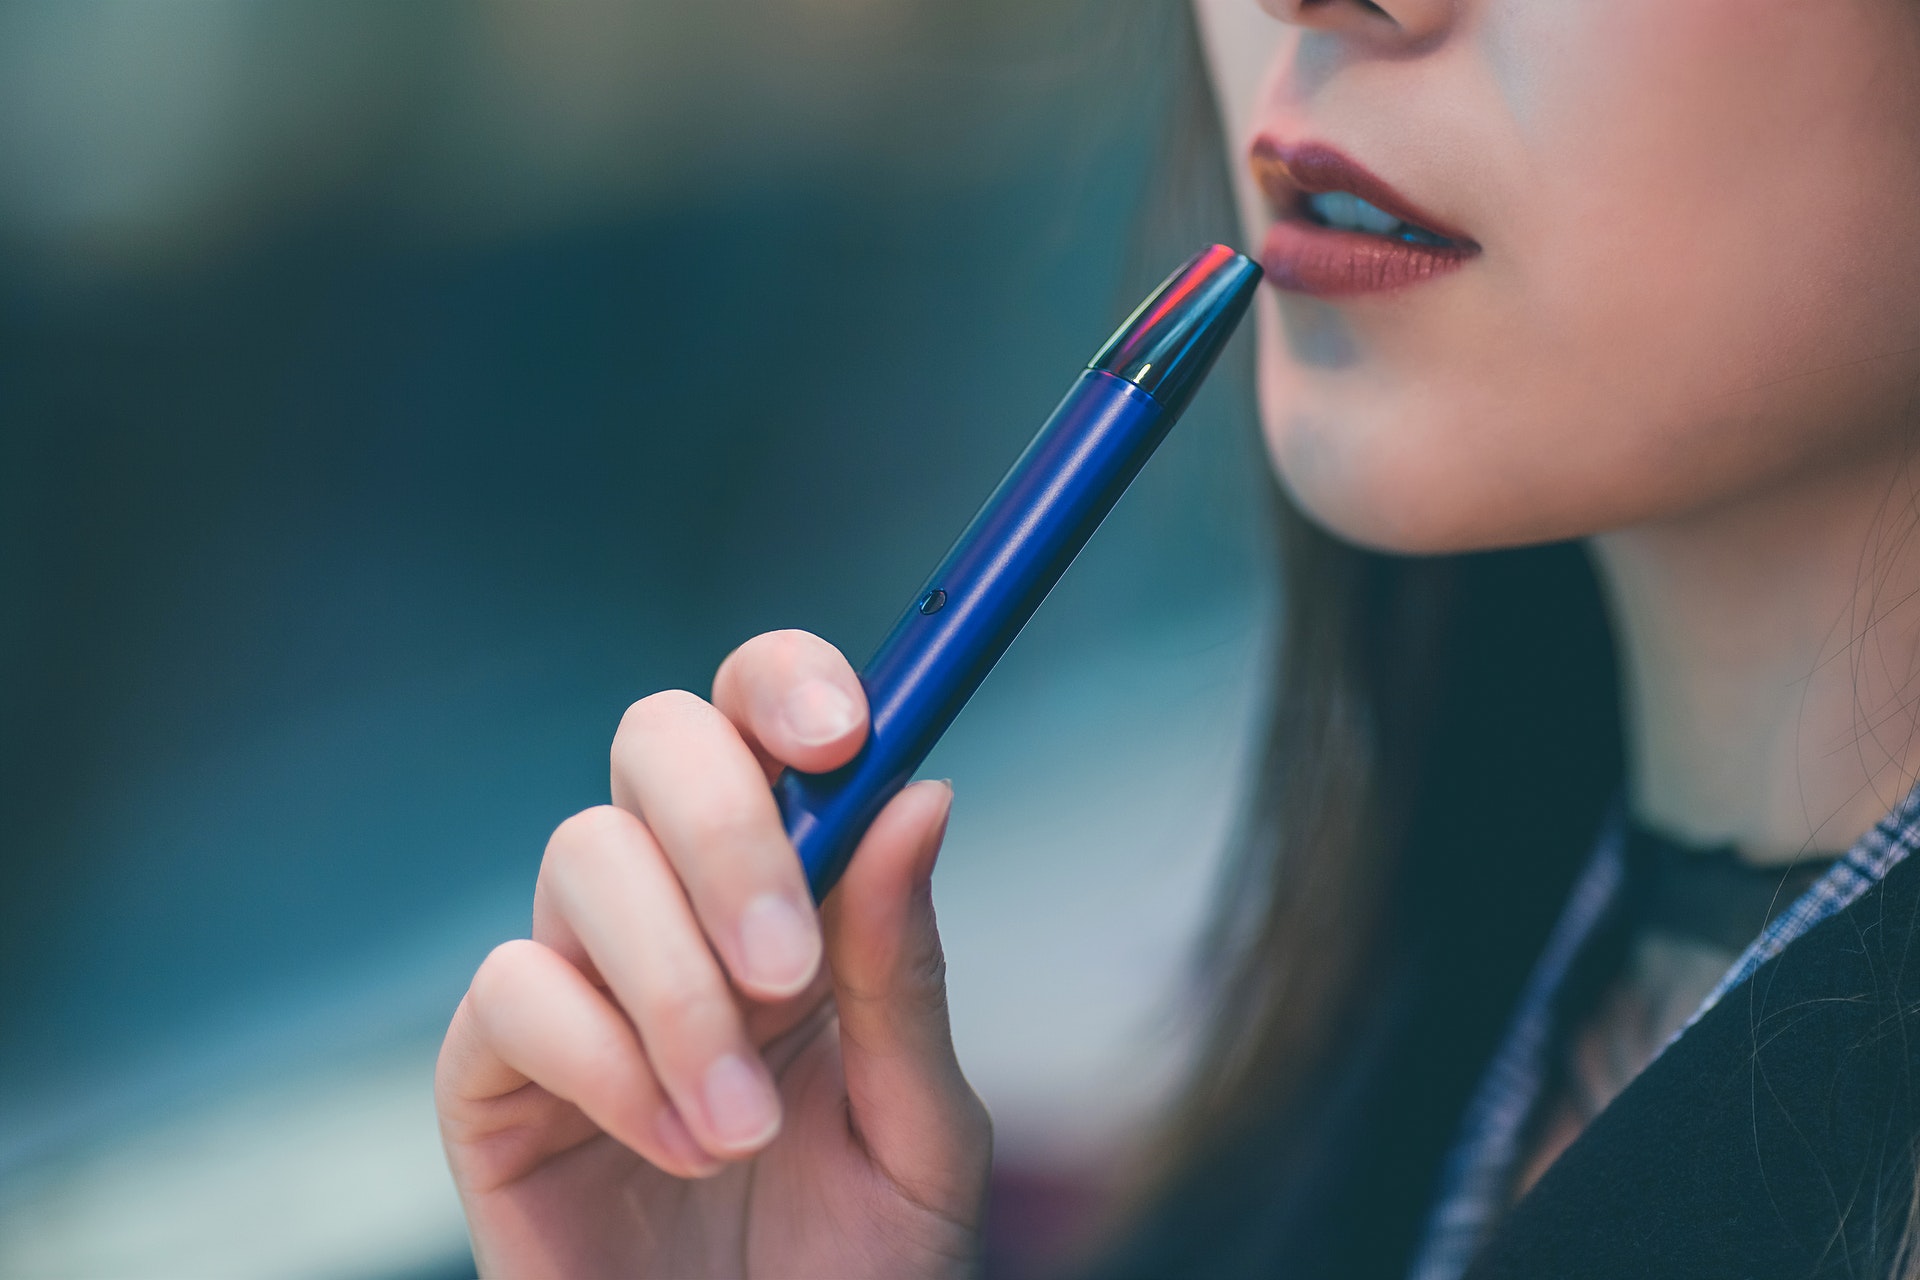 The Beginner's Guide To Buying First Vaporizer